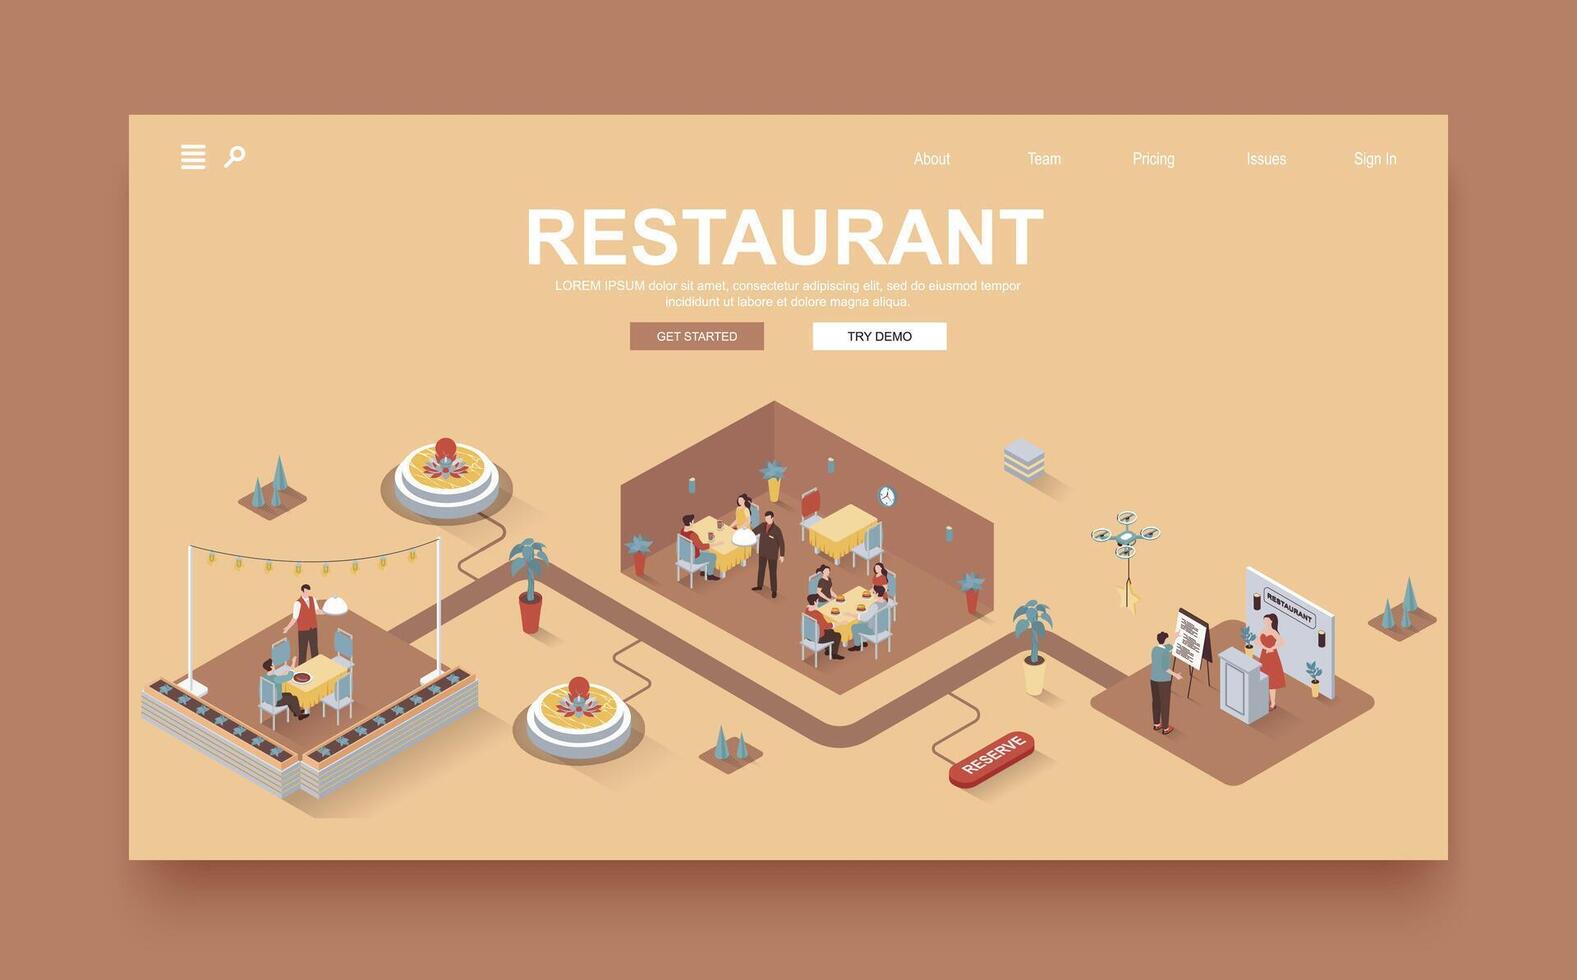 Restaurant concept 3d isometric landing page template. People visit restaurant, book tables, staff works at reception, waiter brings orders. Vector illustration in isometry graphic design.